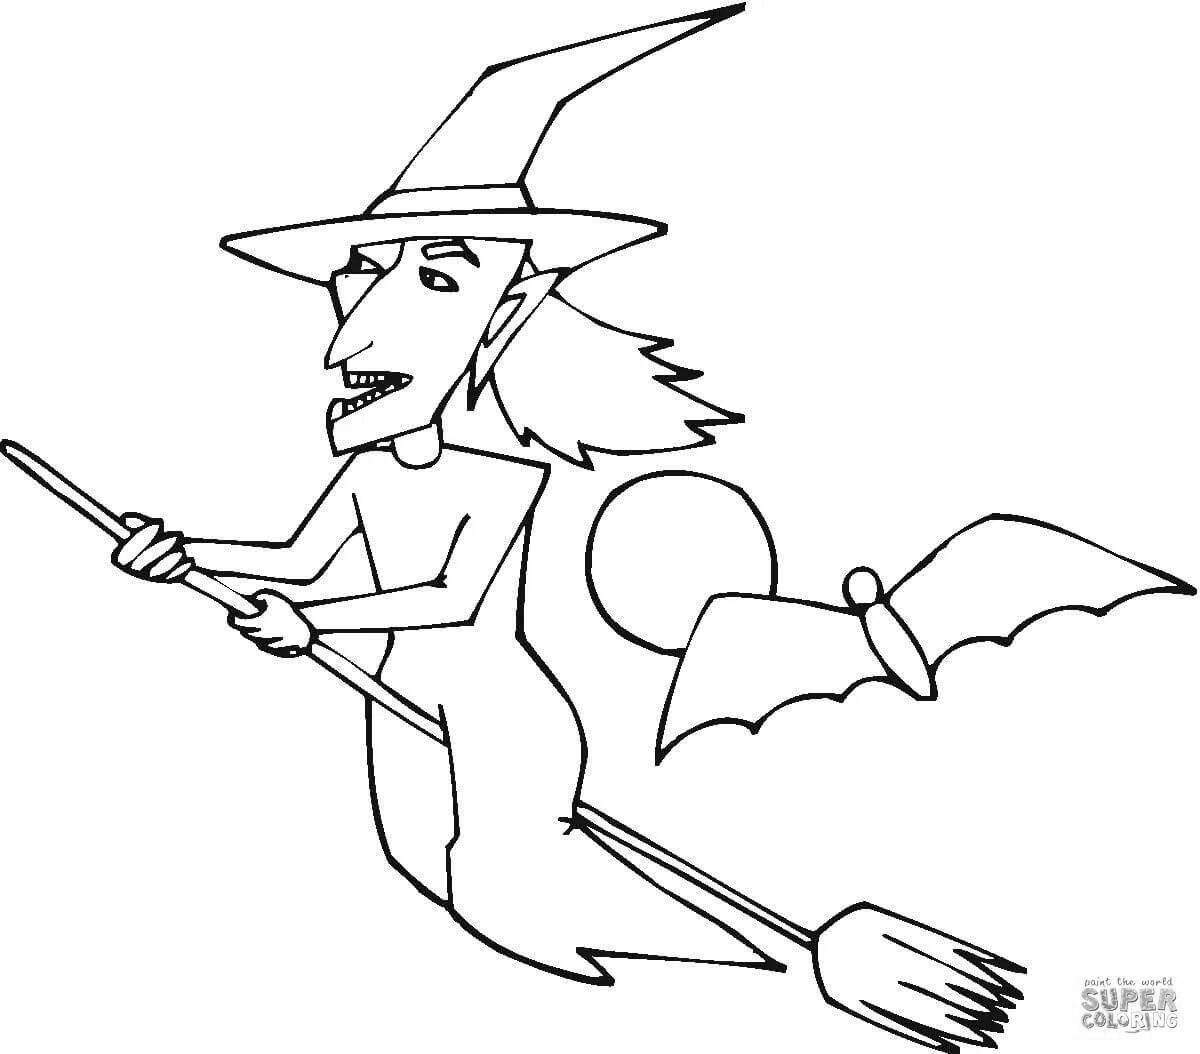 Vile evil witch coloring book